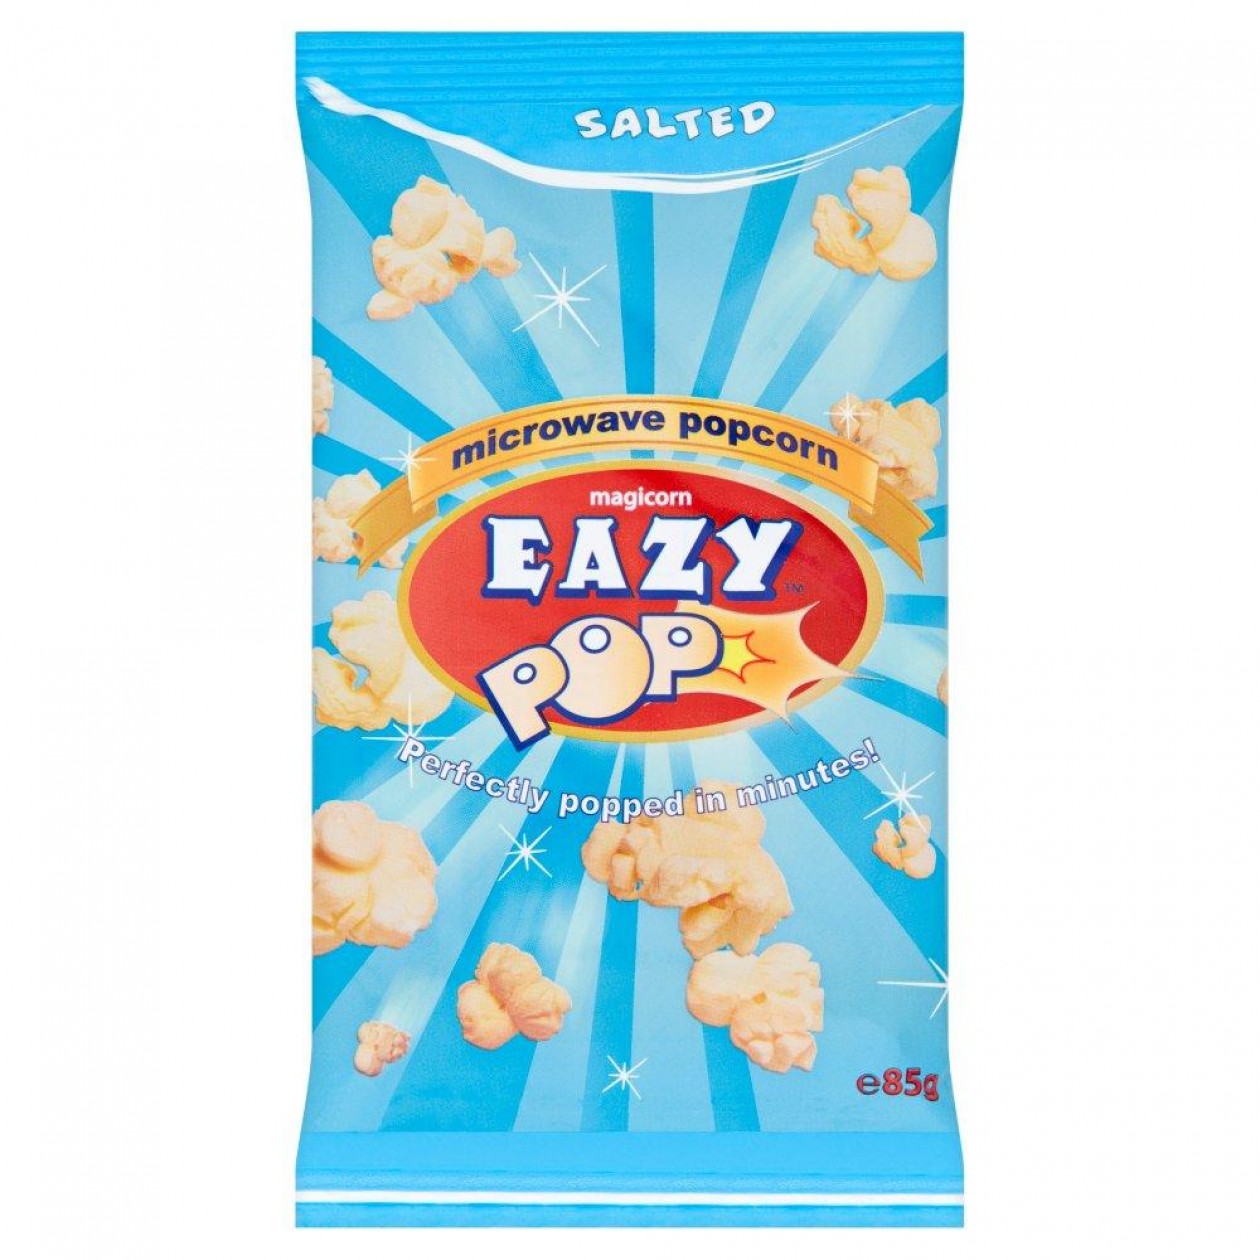 Magicorn Eazy Pop Salted Microwave Popcorn 85g (Pack of 16)